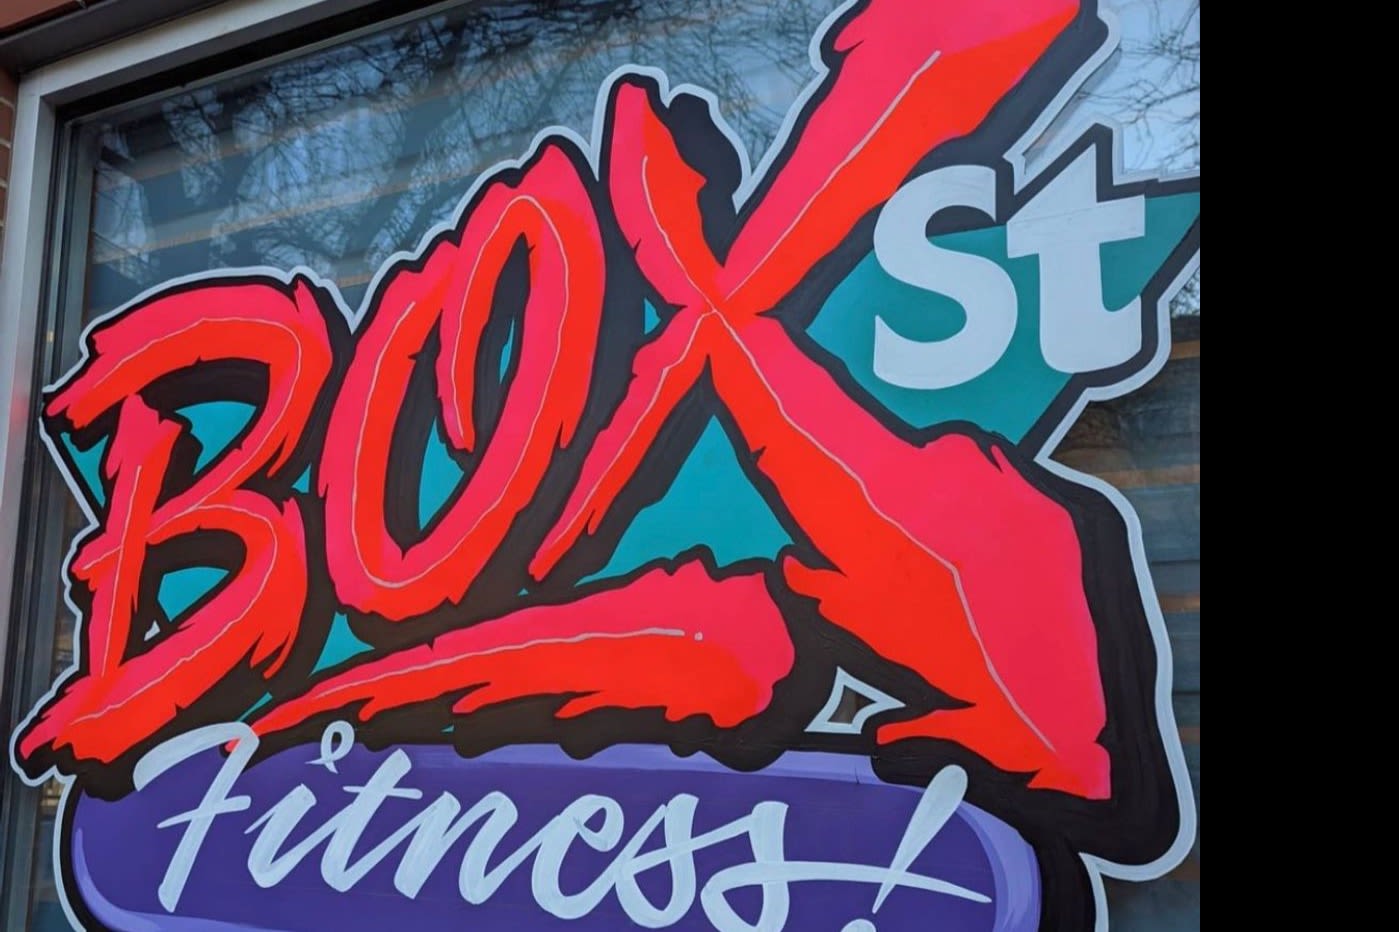 Box St Fitness: Read Reviews and Book Classes on ClassPass